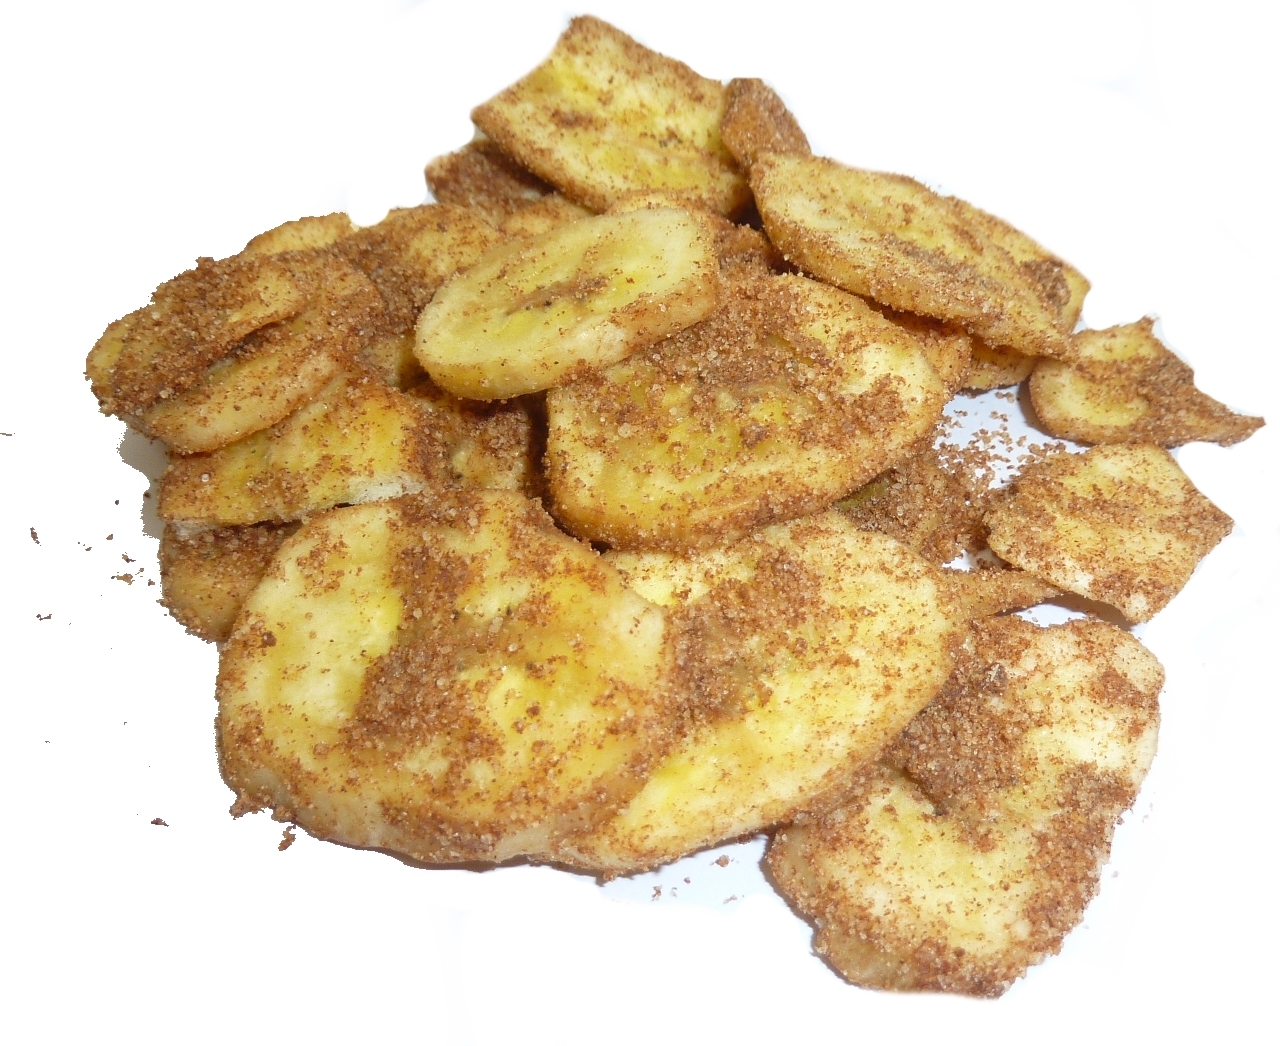 a pile of fried plantains against a white background